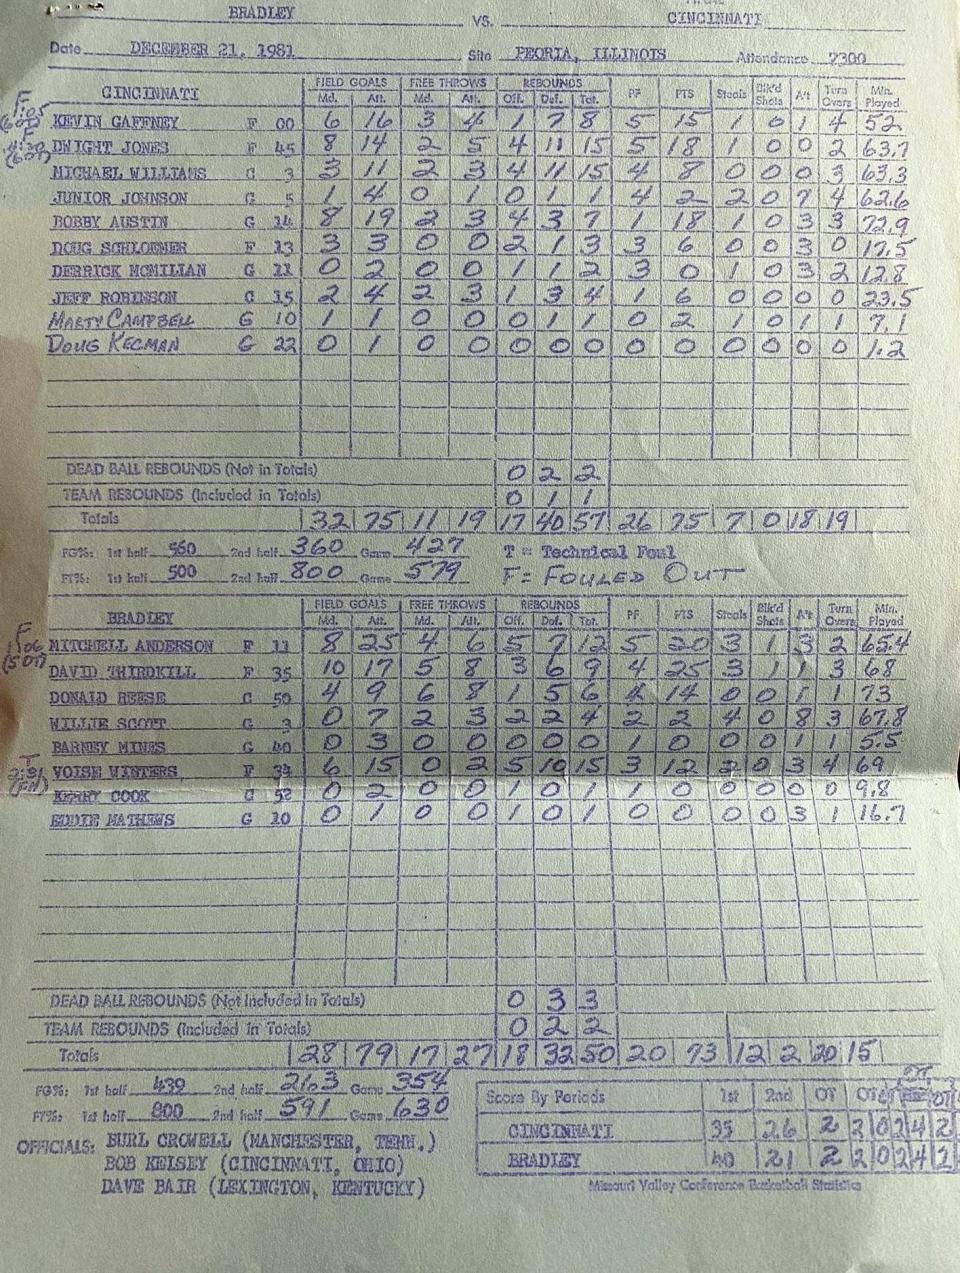 The official, hand-written box score from the longest men's basketball game in NCAA history, a Dec. 21, 1981 epic in which Cincinnati beat Bradley University on the Hilltop, 75-73, in seven overtimes.